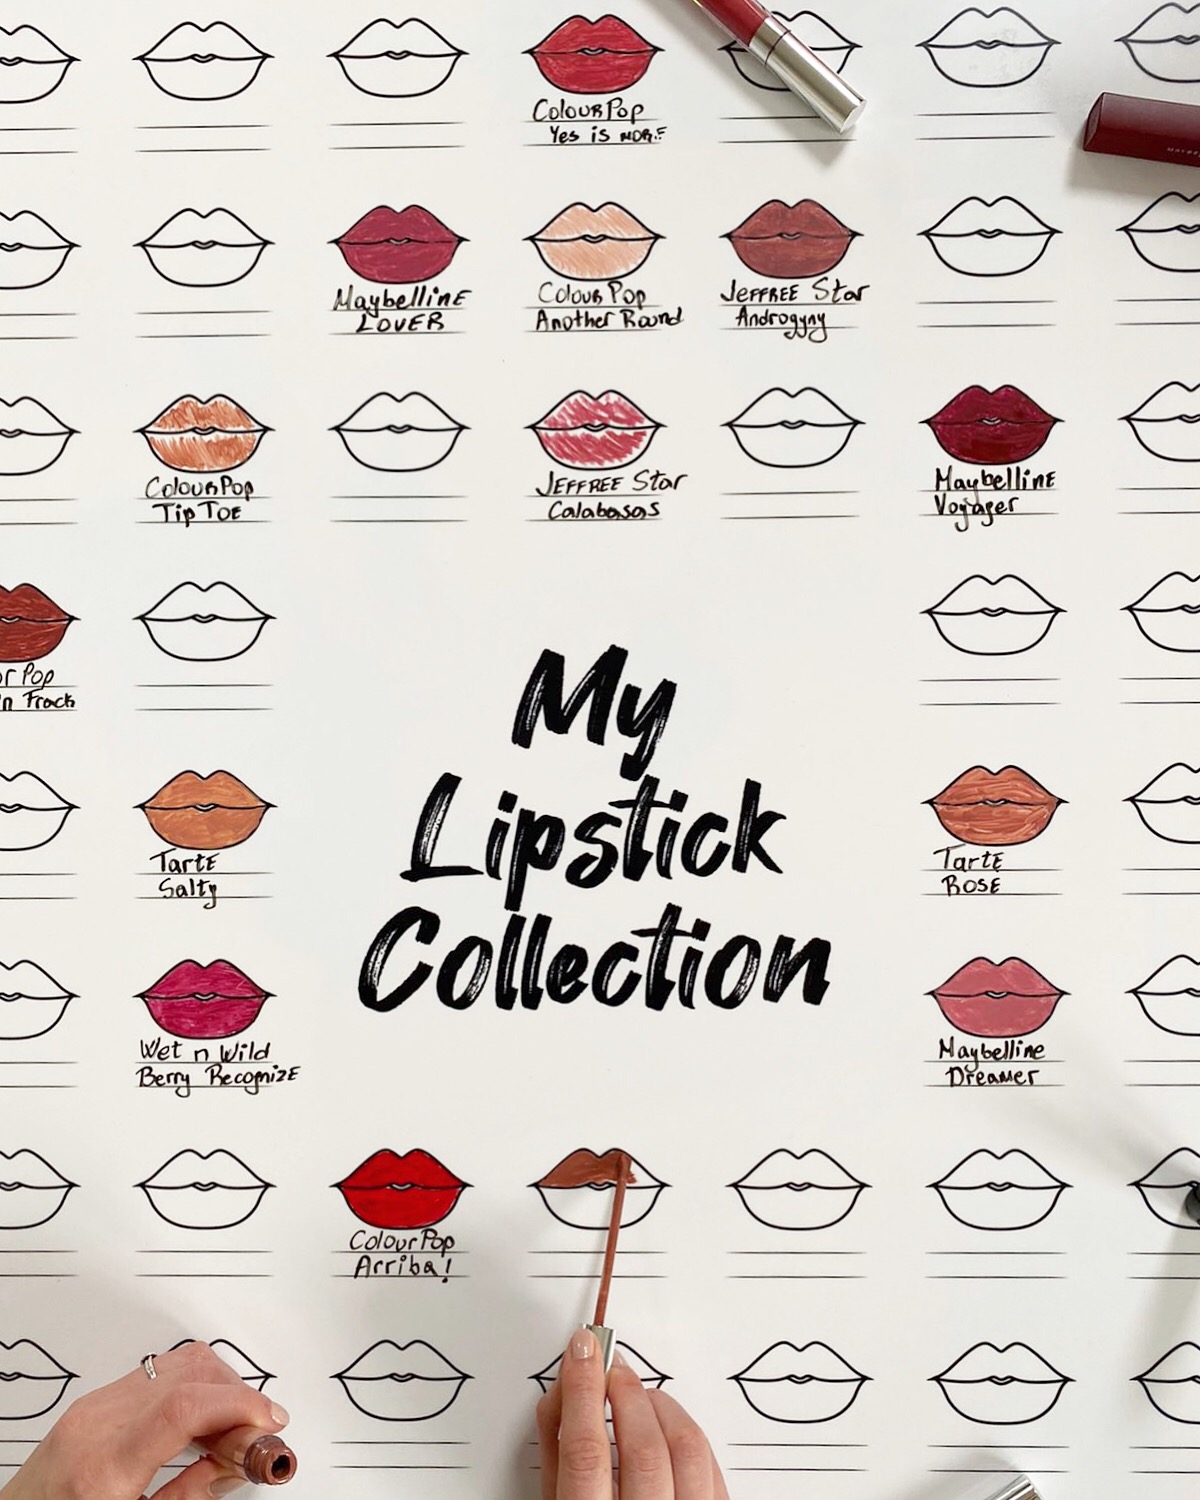 Say goodbye to your lipstick chaos – The Swatch chart